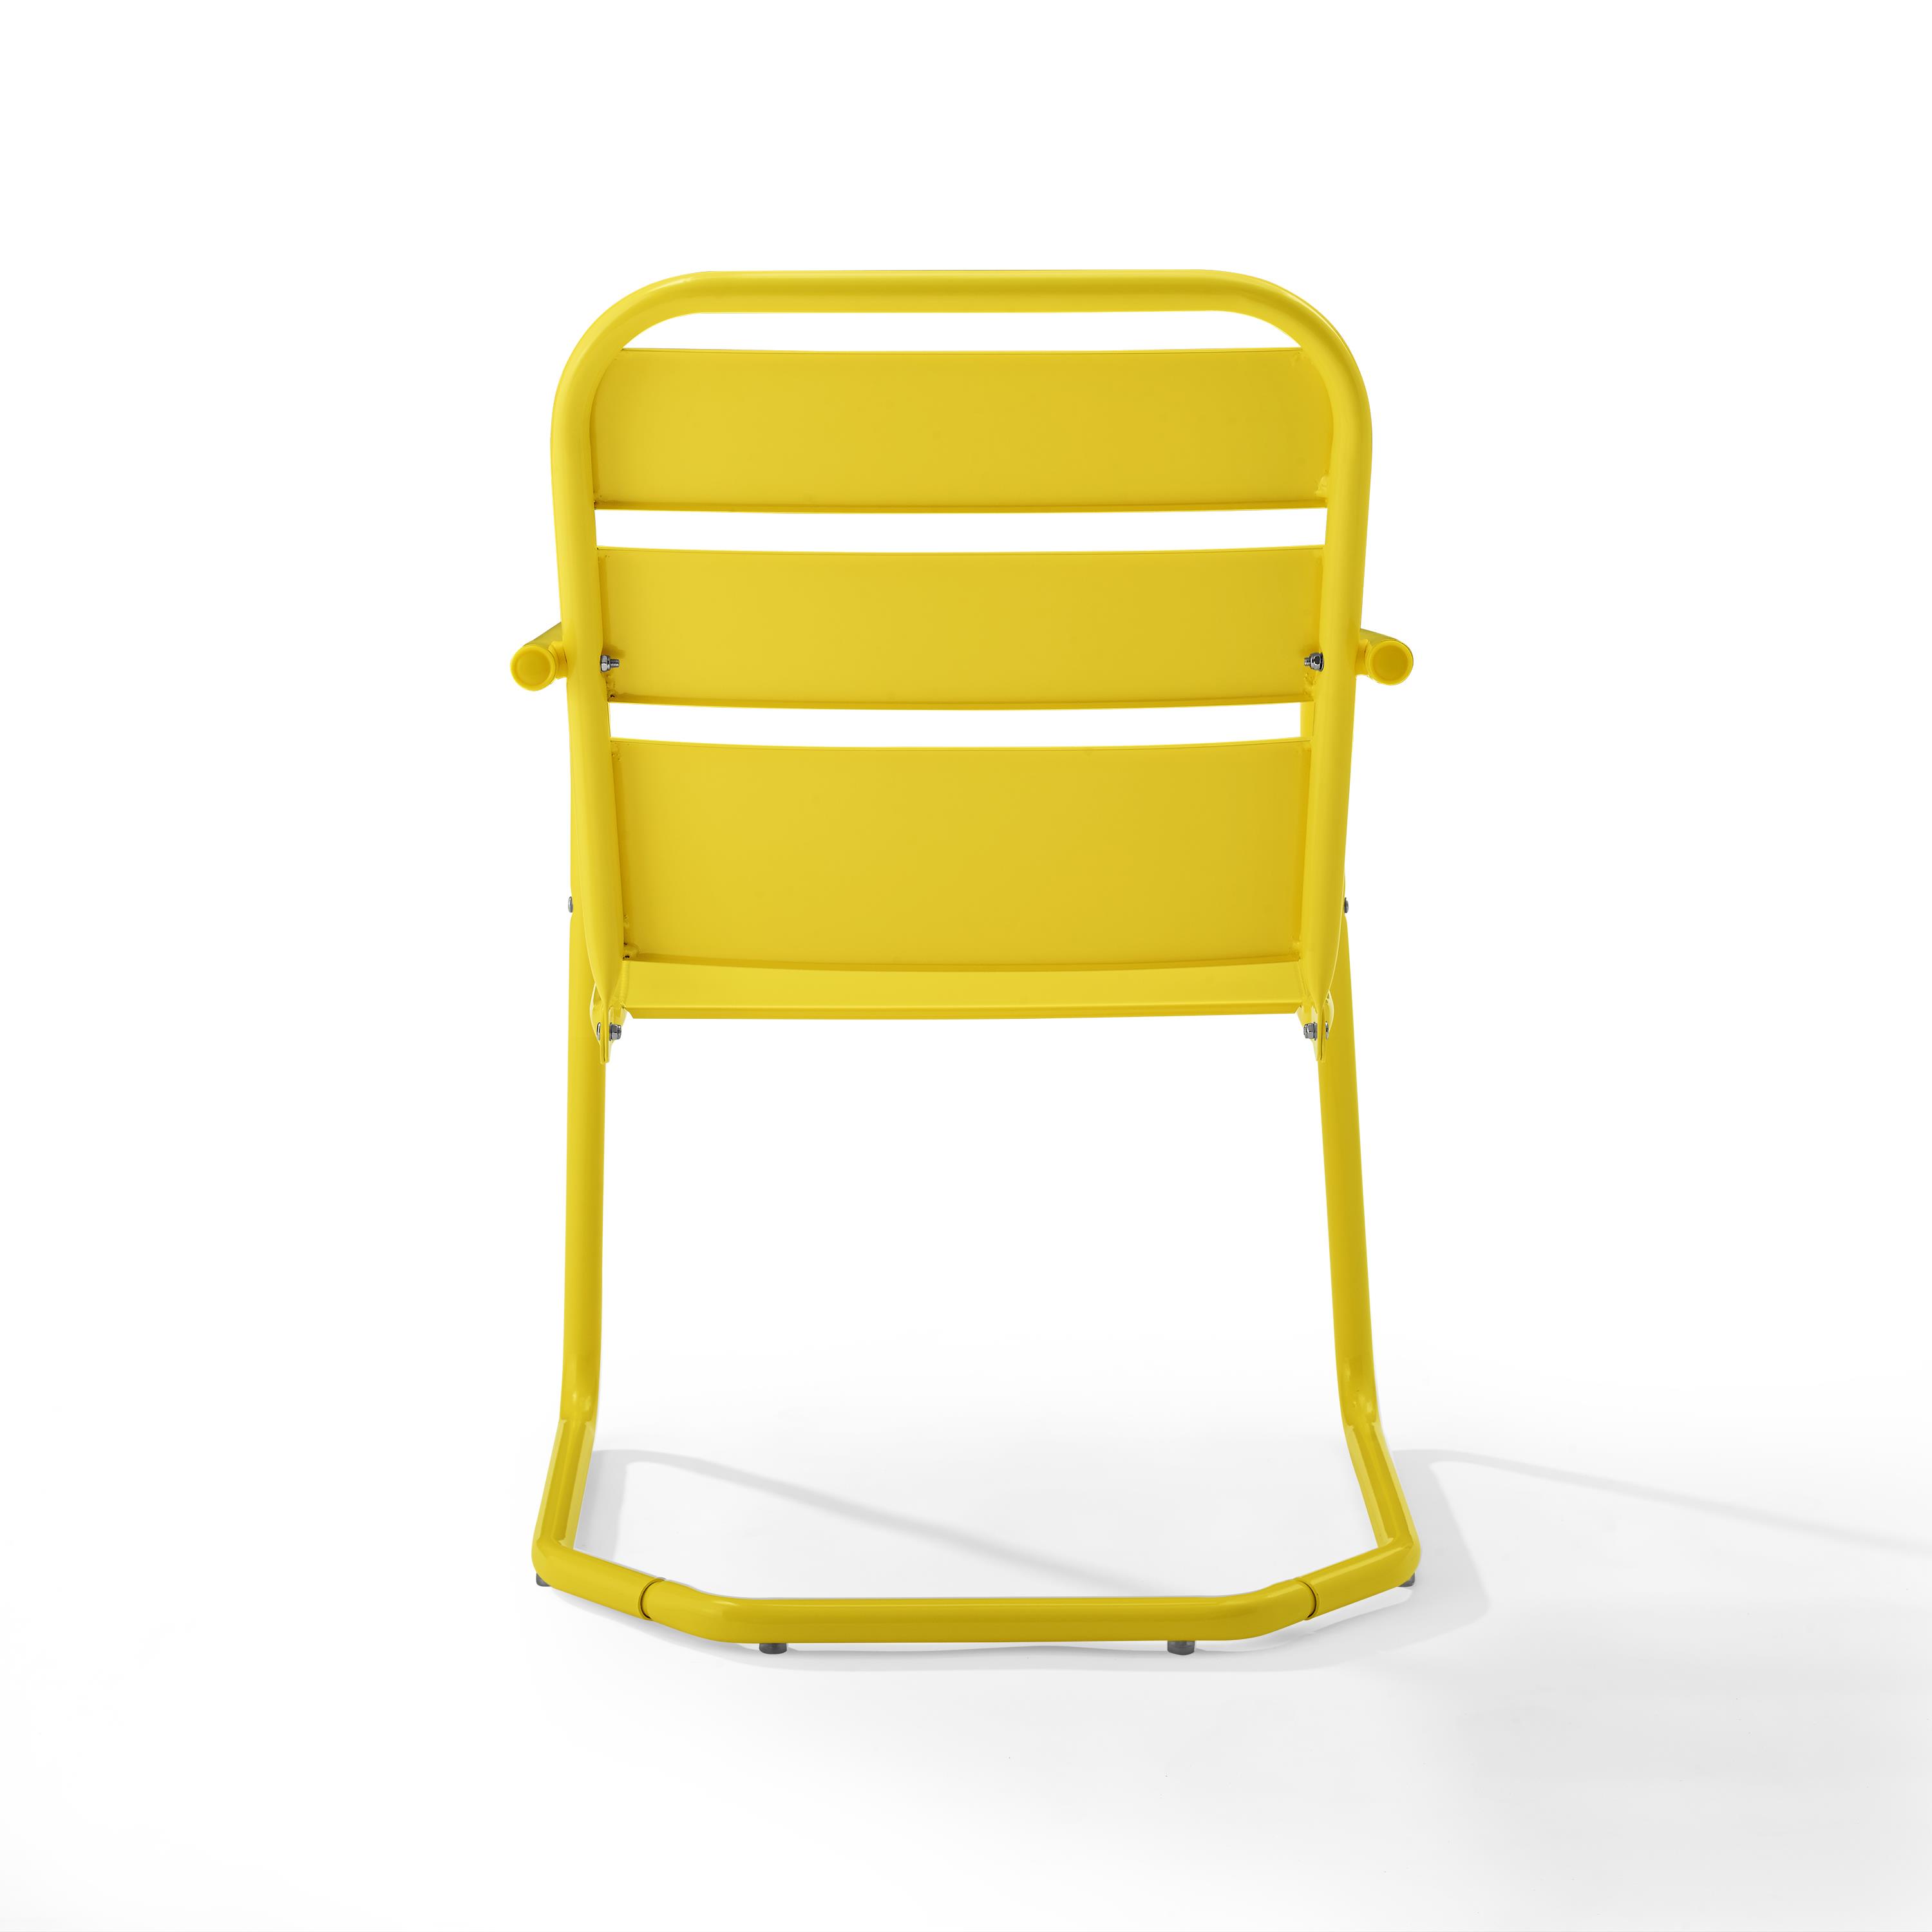 Crosley Brighton Metal Patio Chair in Yellow (Set of 2) - image 4 of 10